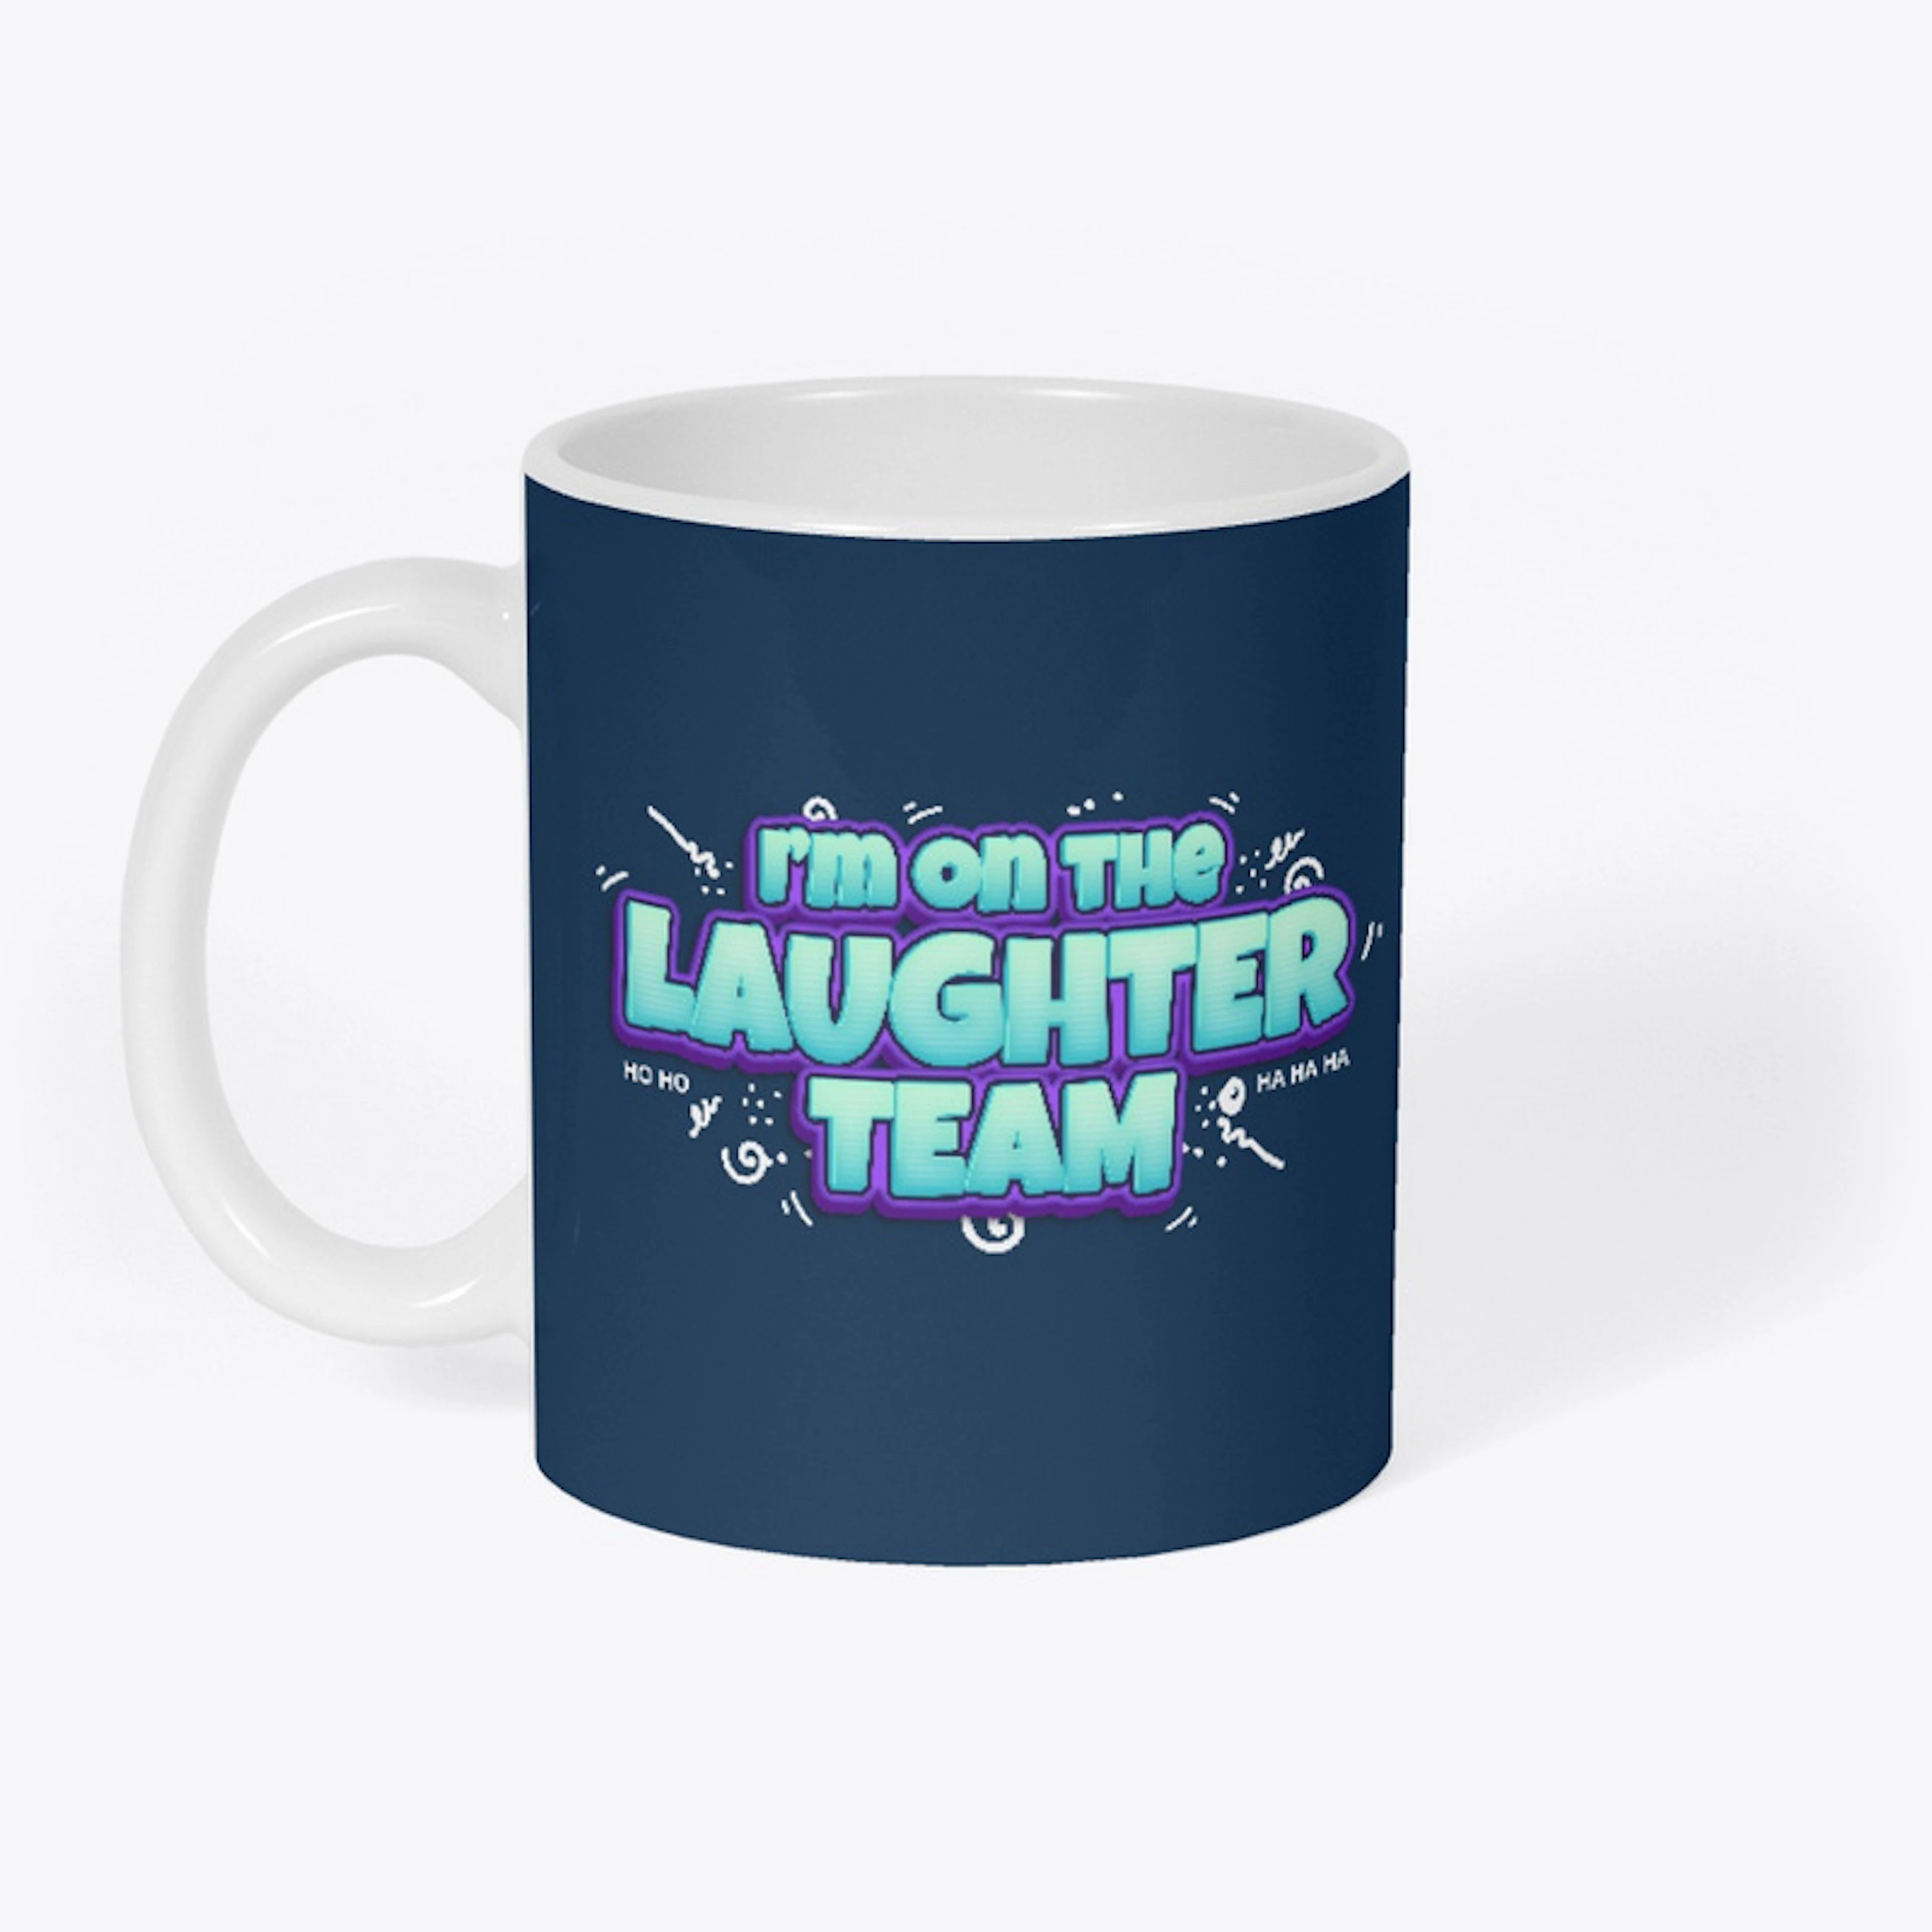 On the laughter team